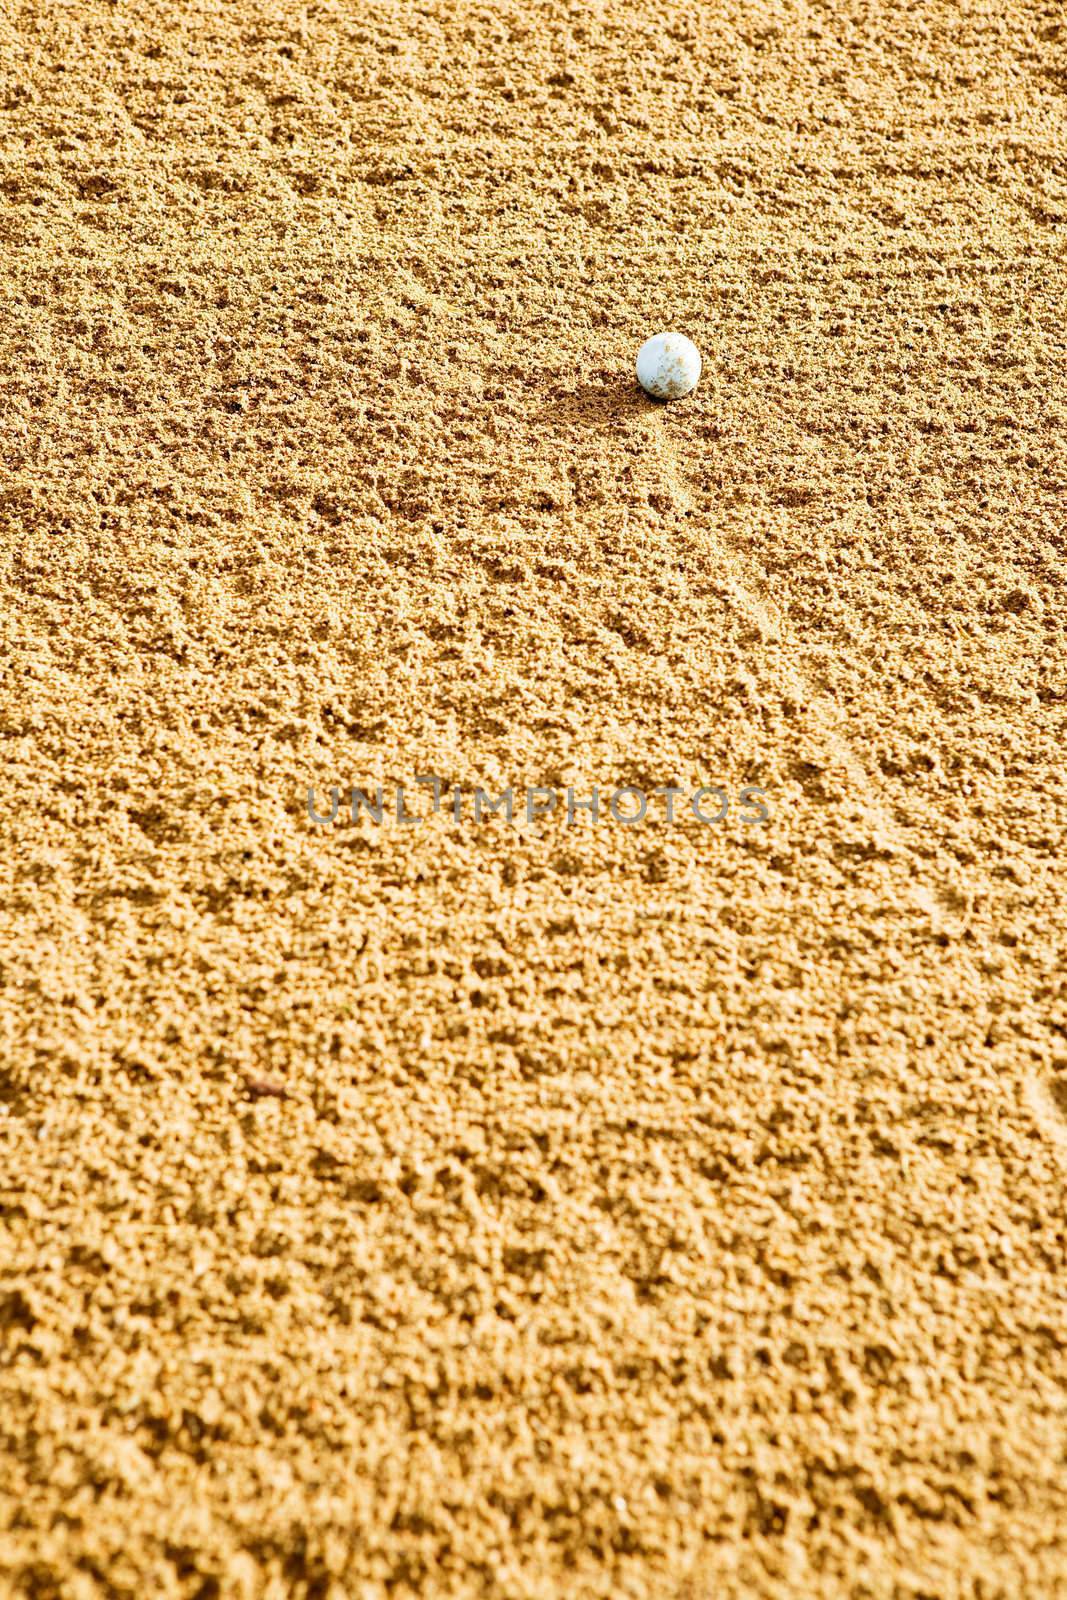 A golf ball in the bunker.